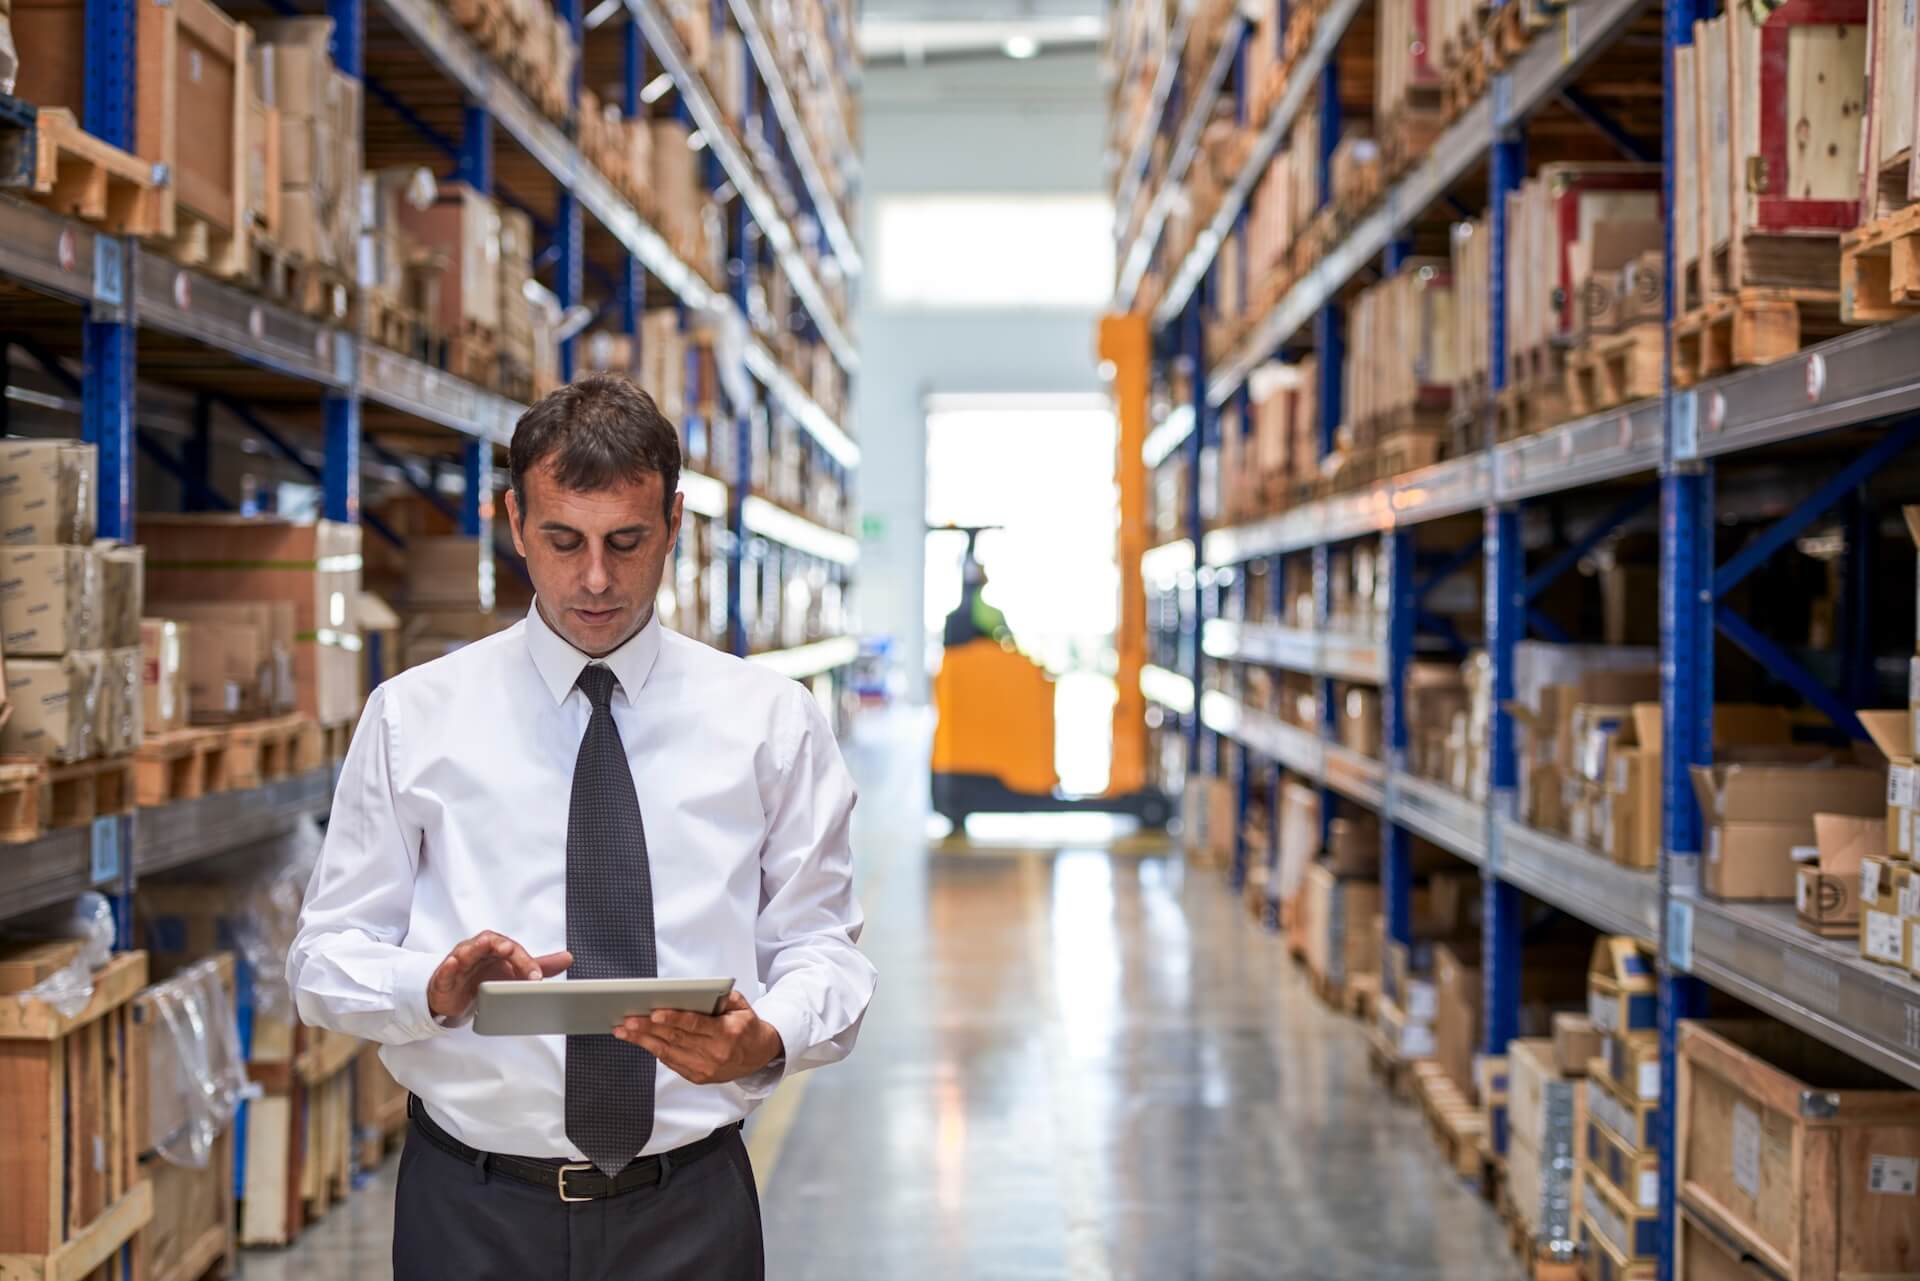 Top 10 inventory management systems for MROs